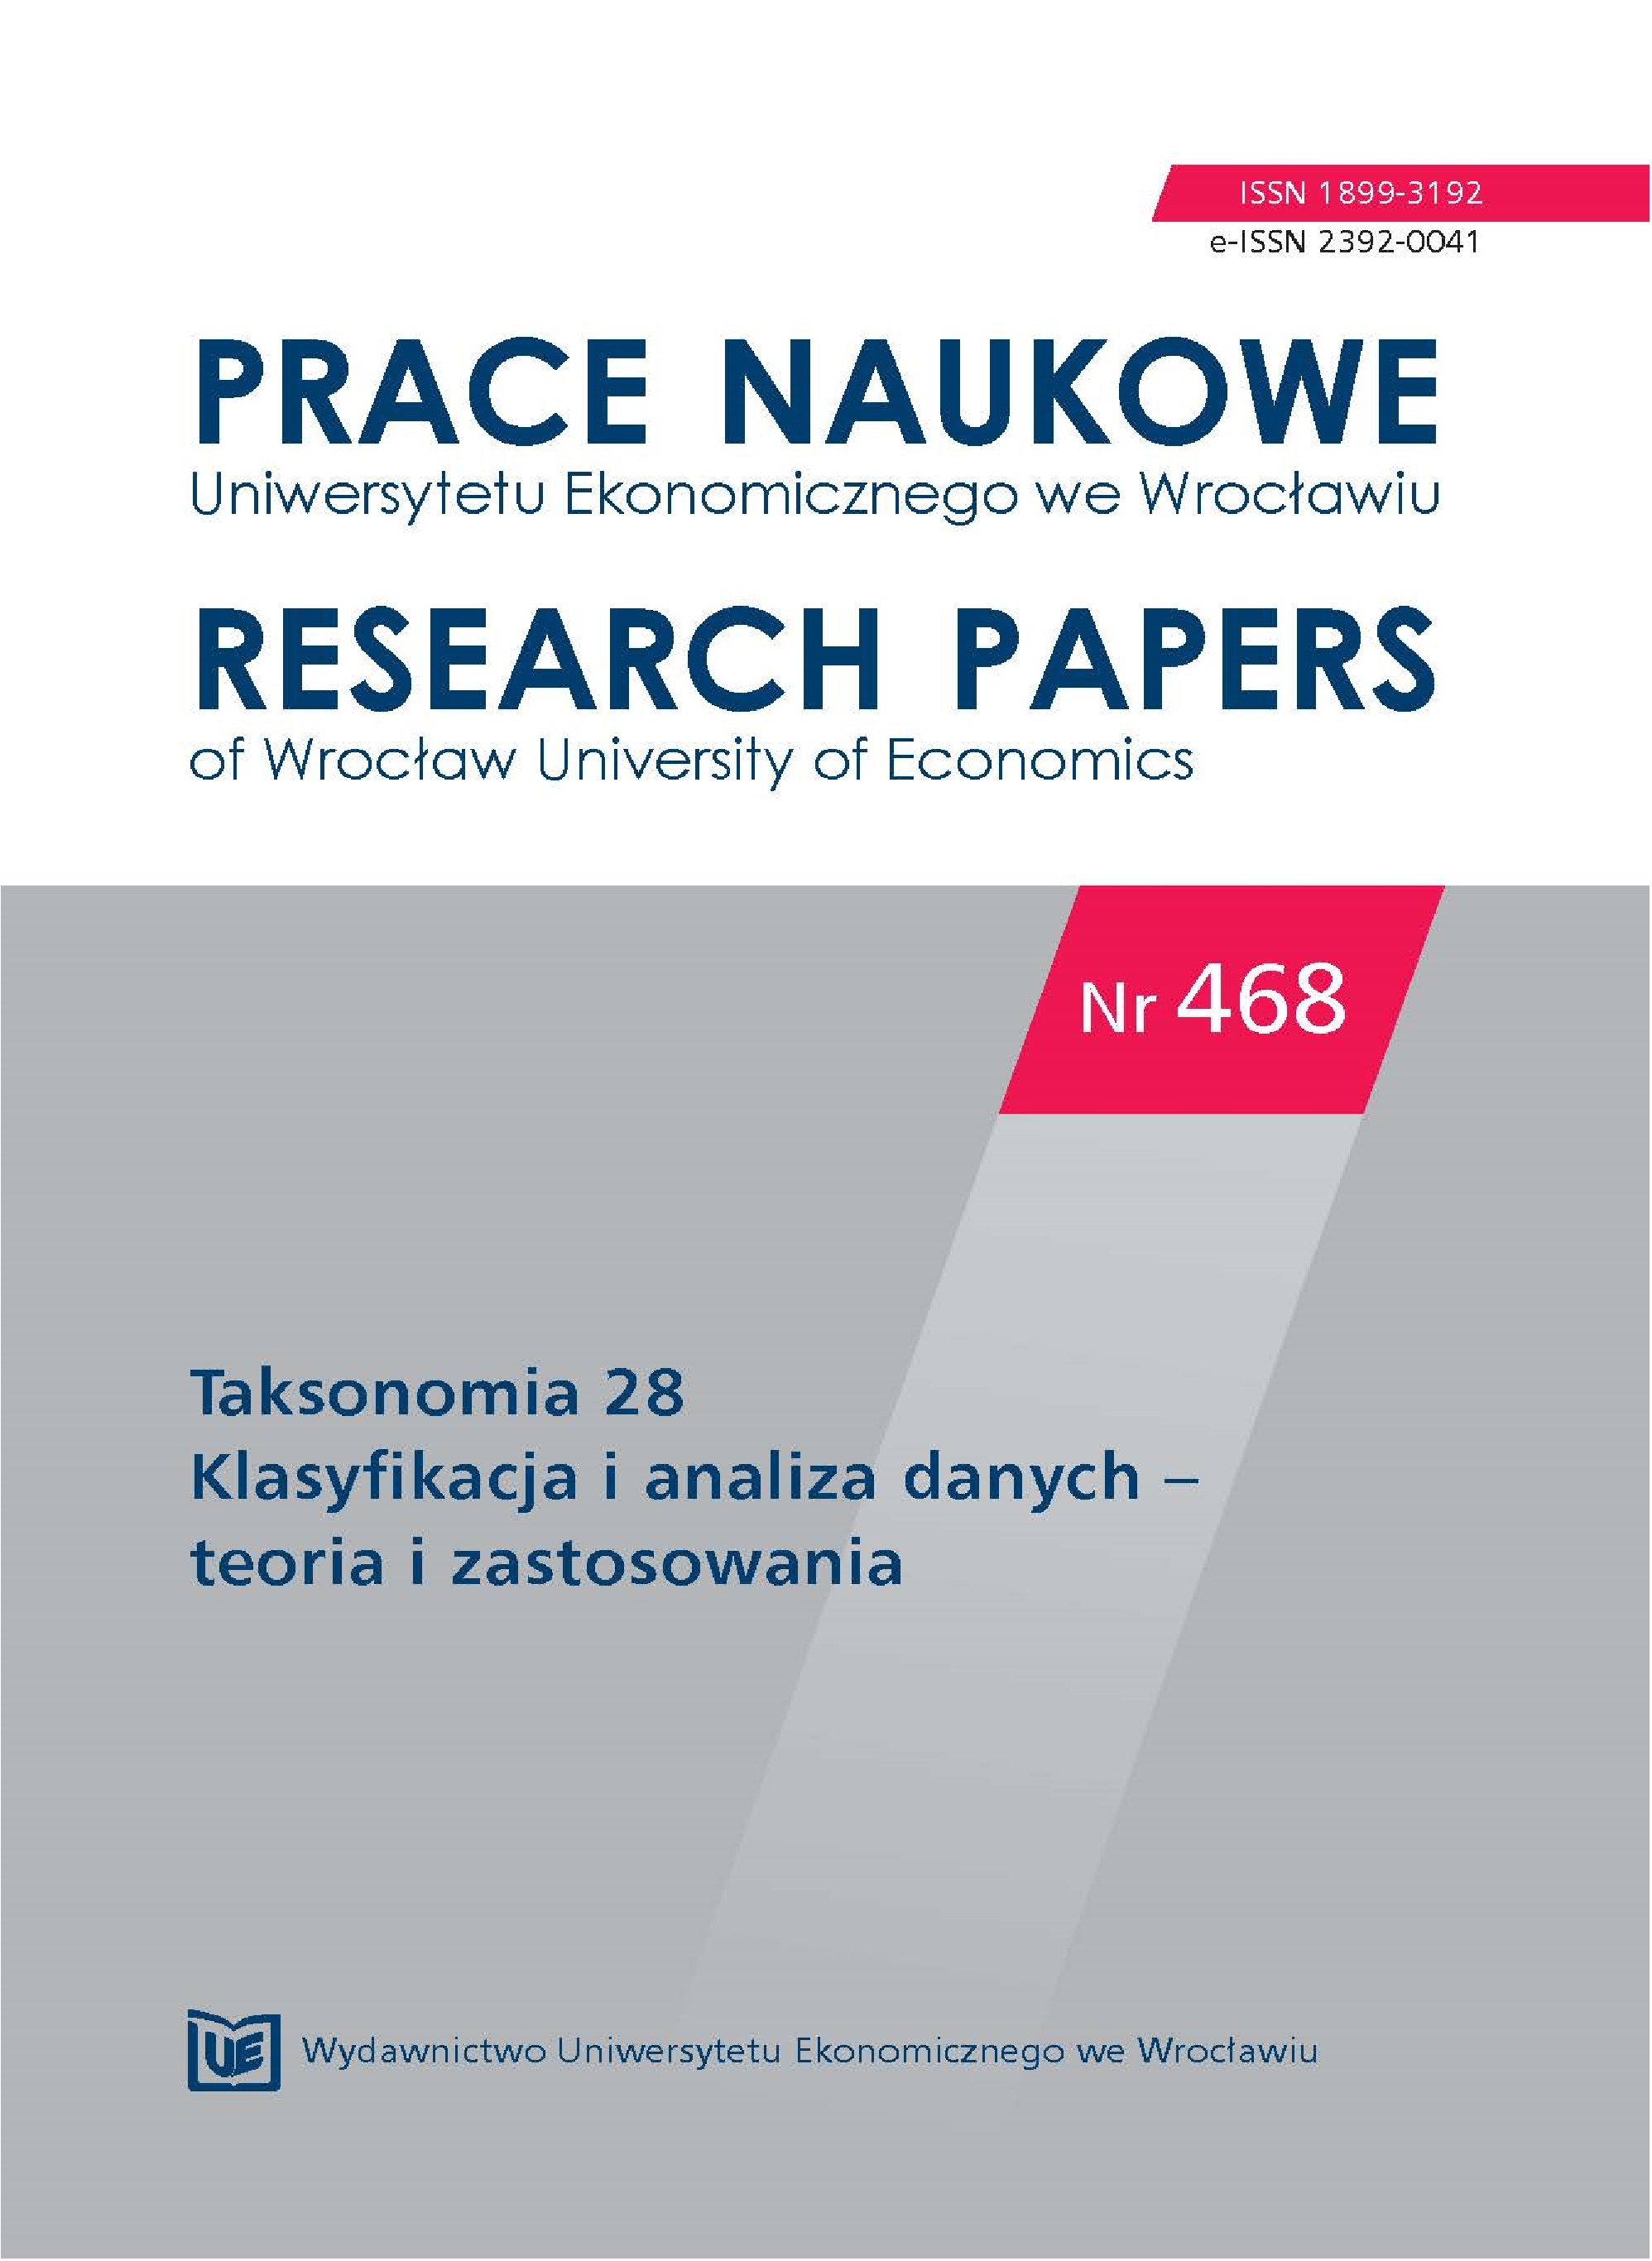 Application of taxonomic
and econometric methods in multivariate analysis of the living standard
of the population in districts in Poland Cover Image